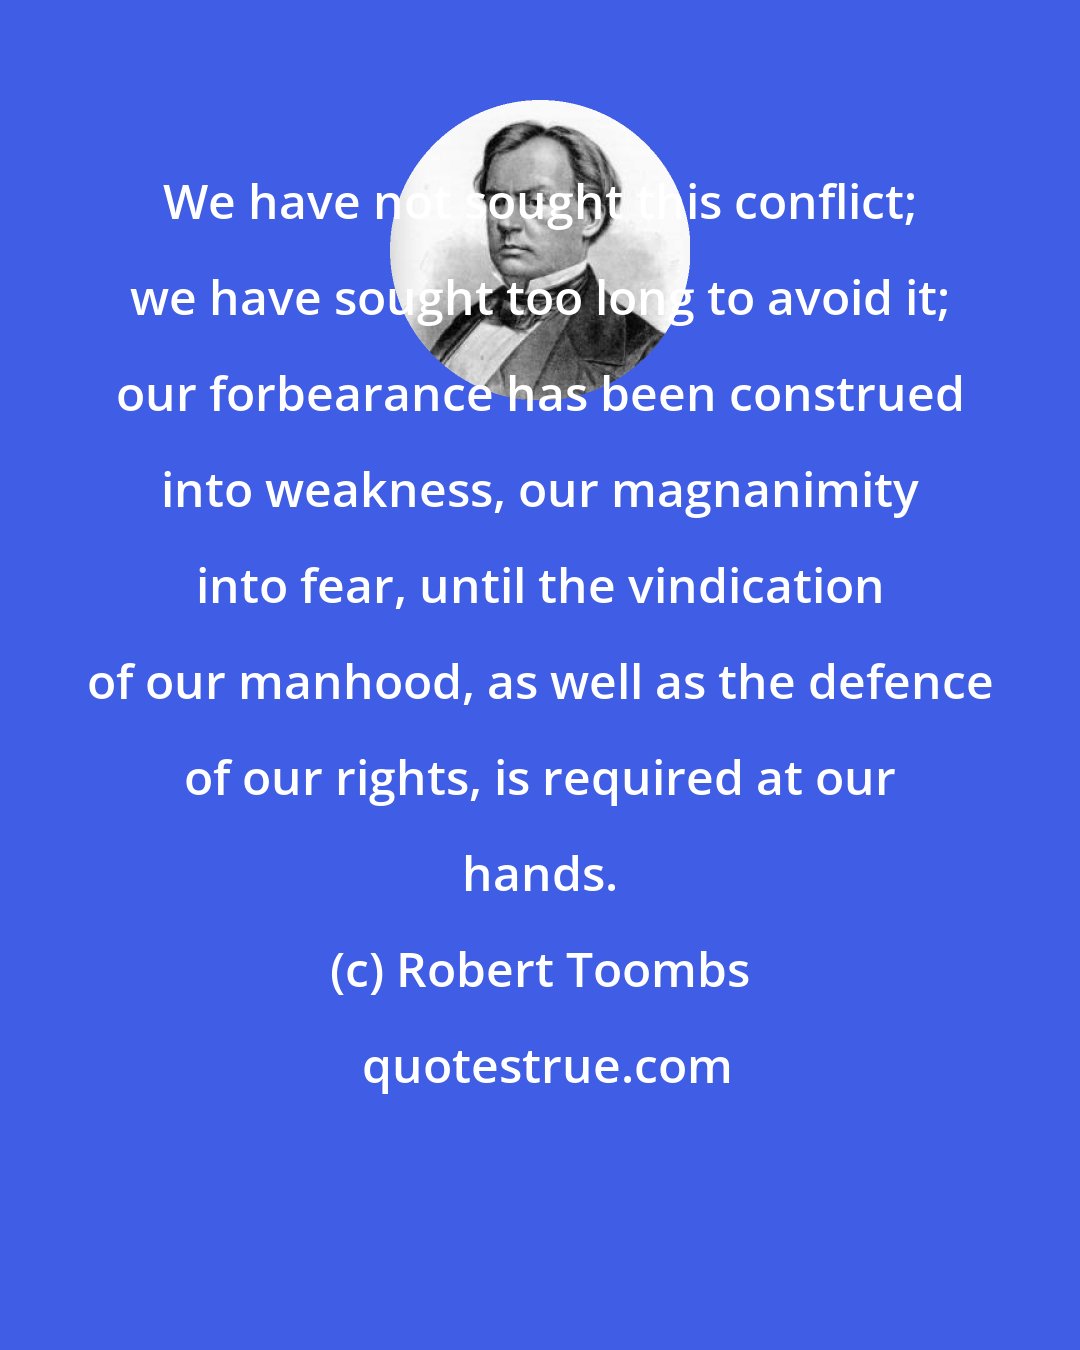 Robert Toombs: We have not sought this conflict; we have sought too long to avoid it; our forbearance has been construed into weakness, our magnanimity into fear, until the vindication of our manhood, as well as the defence of our rights, is required at our hands.